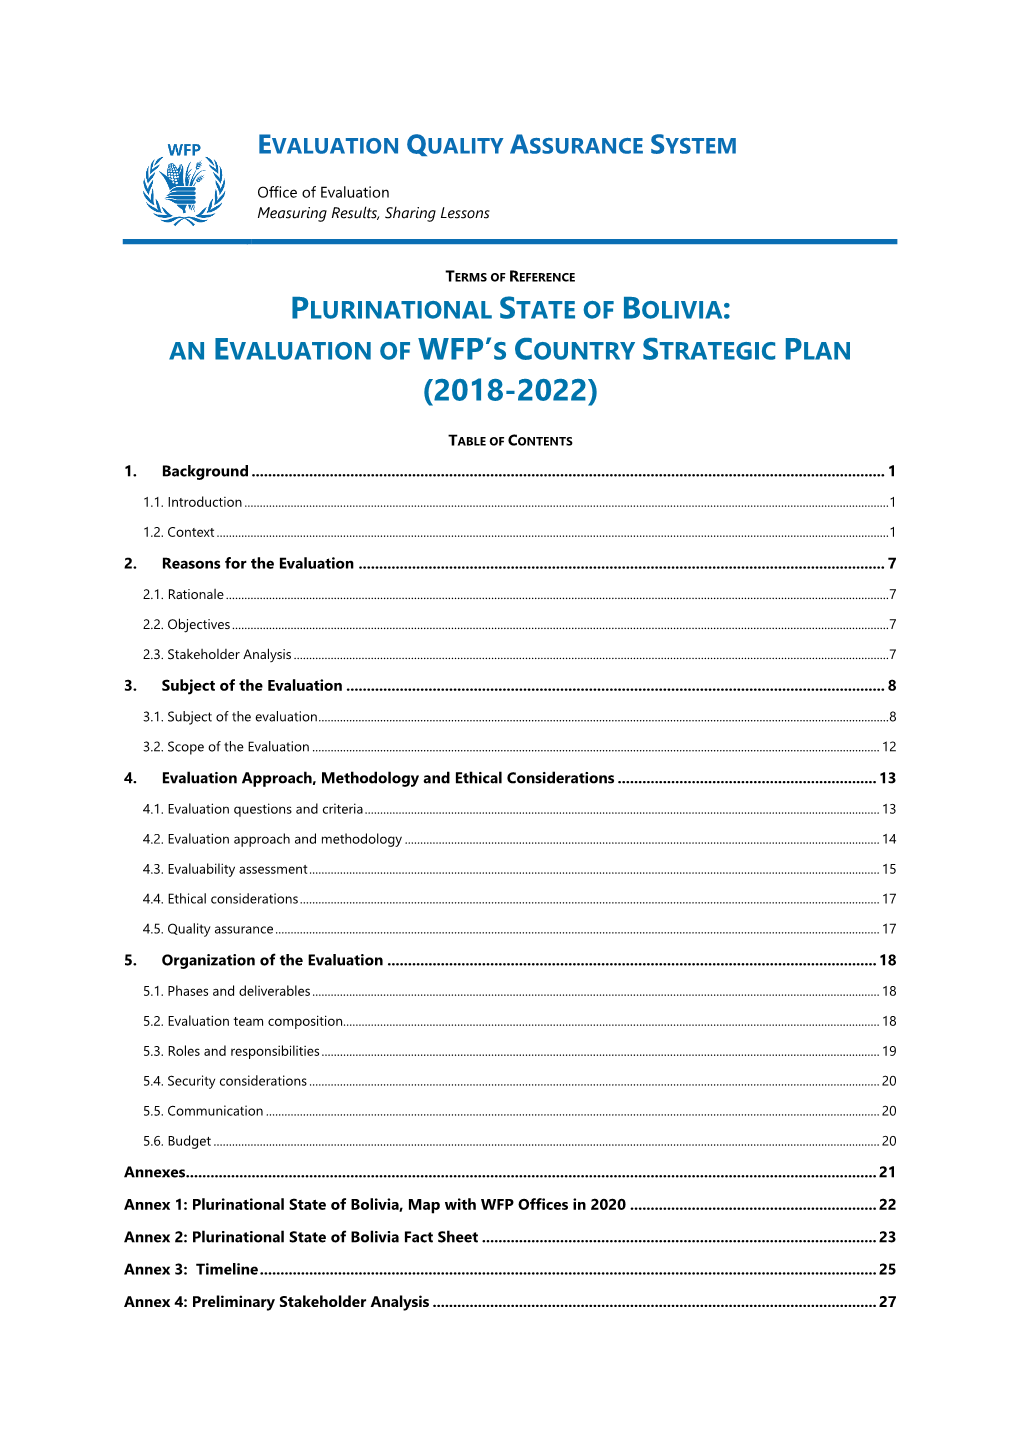 Plurinational State of Bolivia: an Evaluation of Wfp’S Country Strategic Plan (2018-2022)